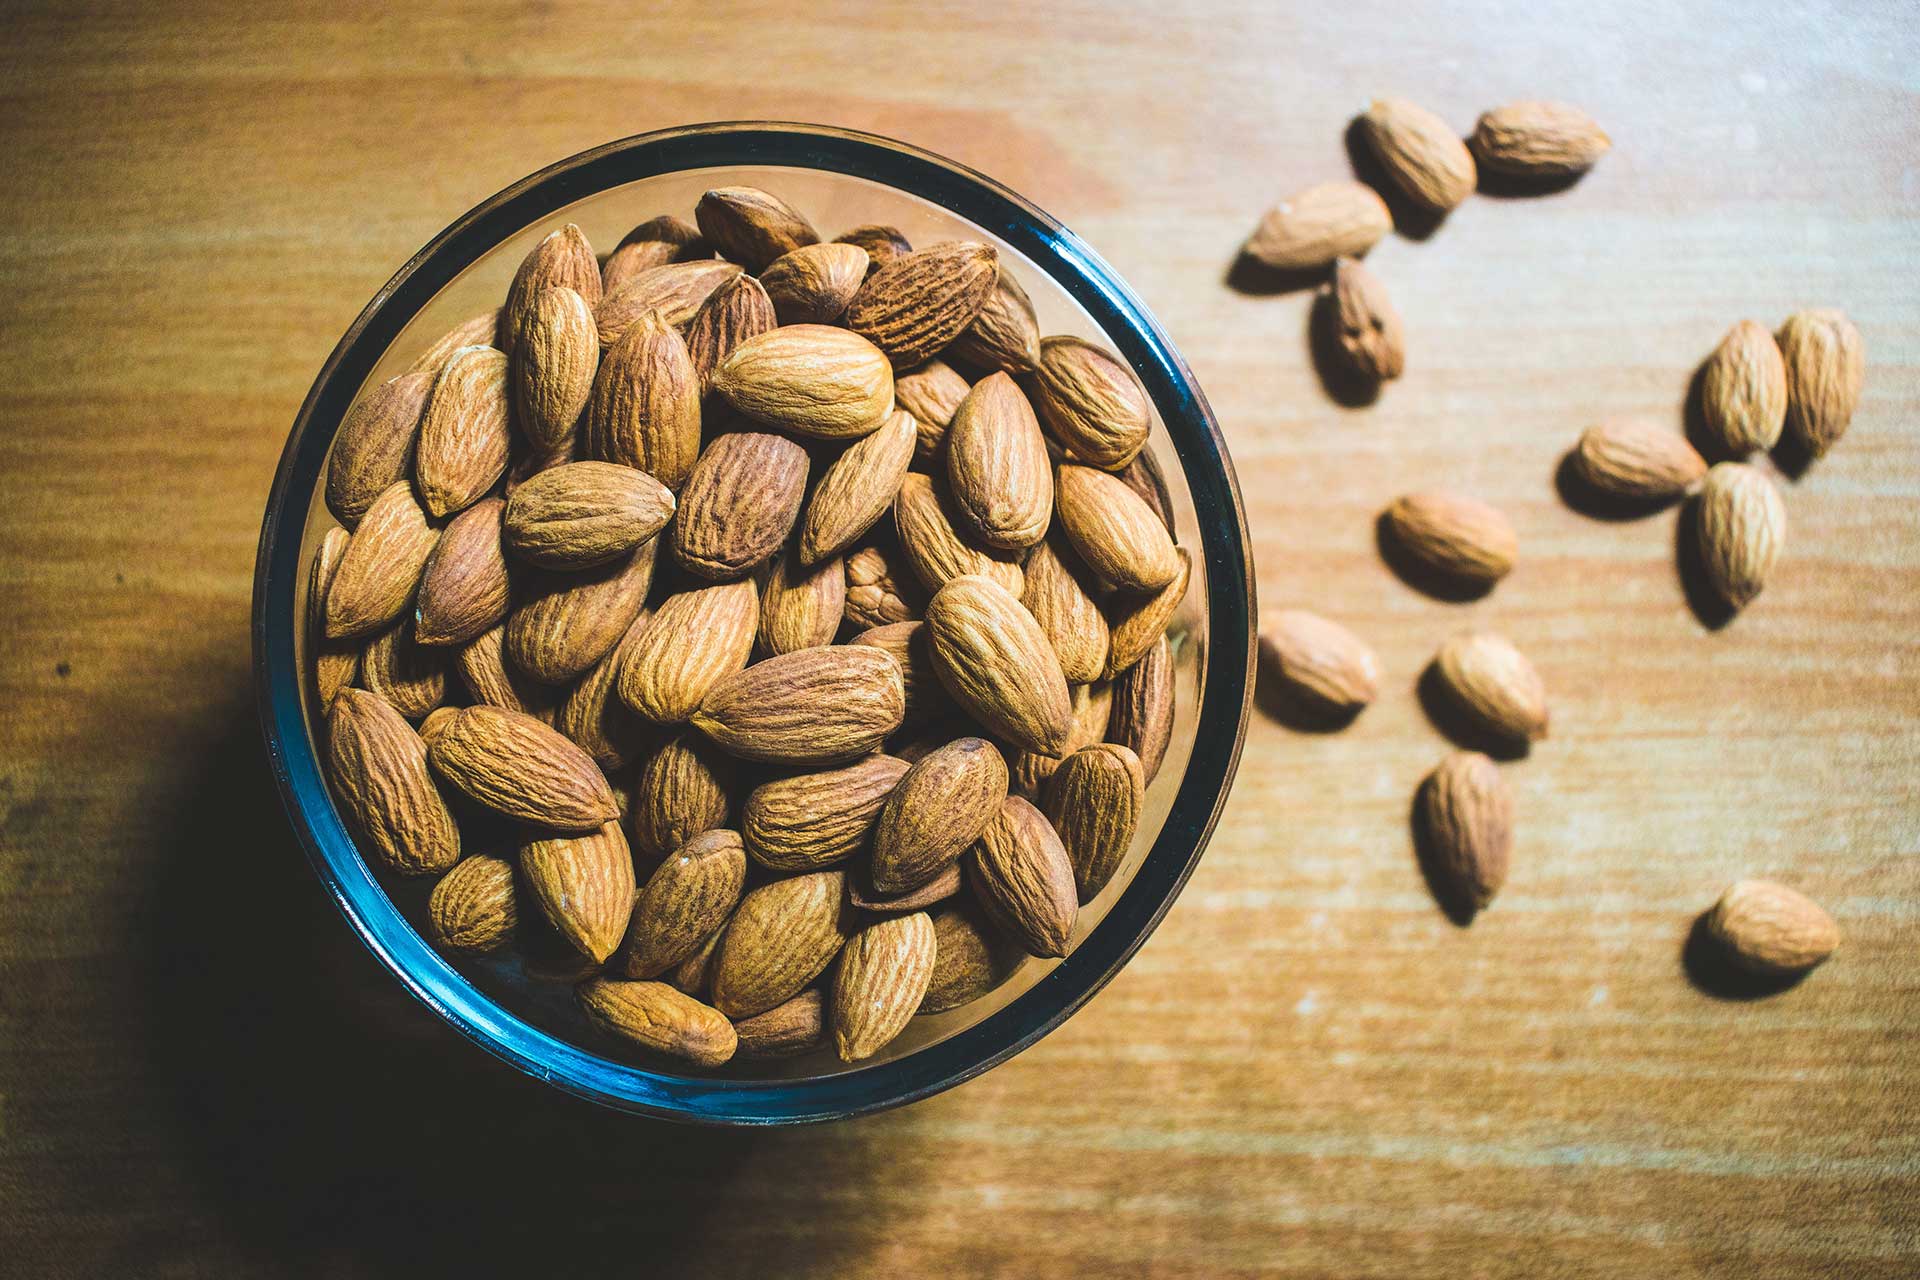 10 Proven Health Benefits Of Almonds That You Need To Know About F